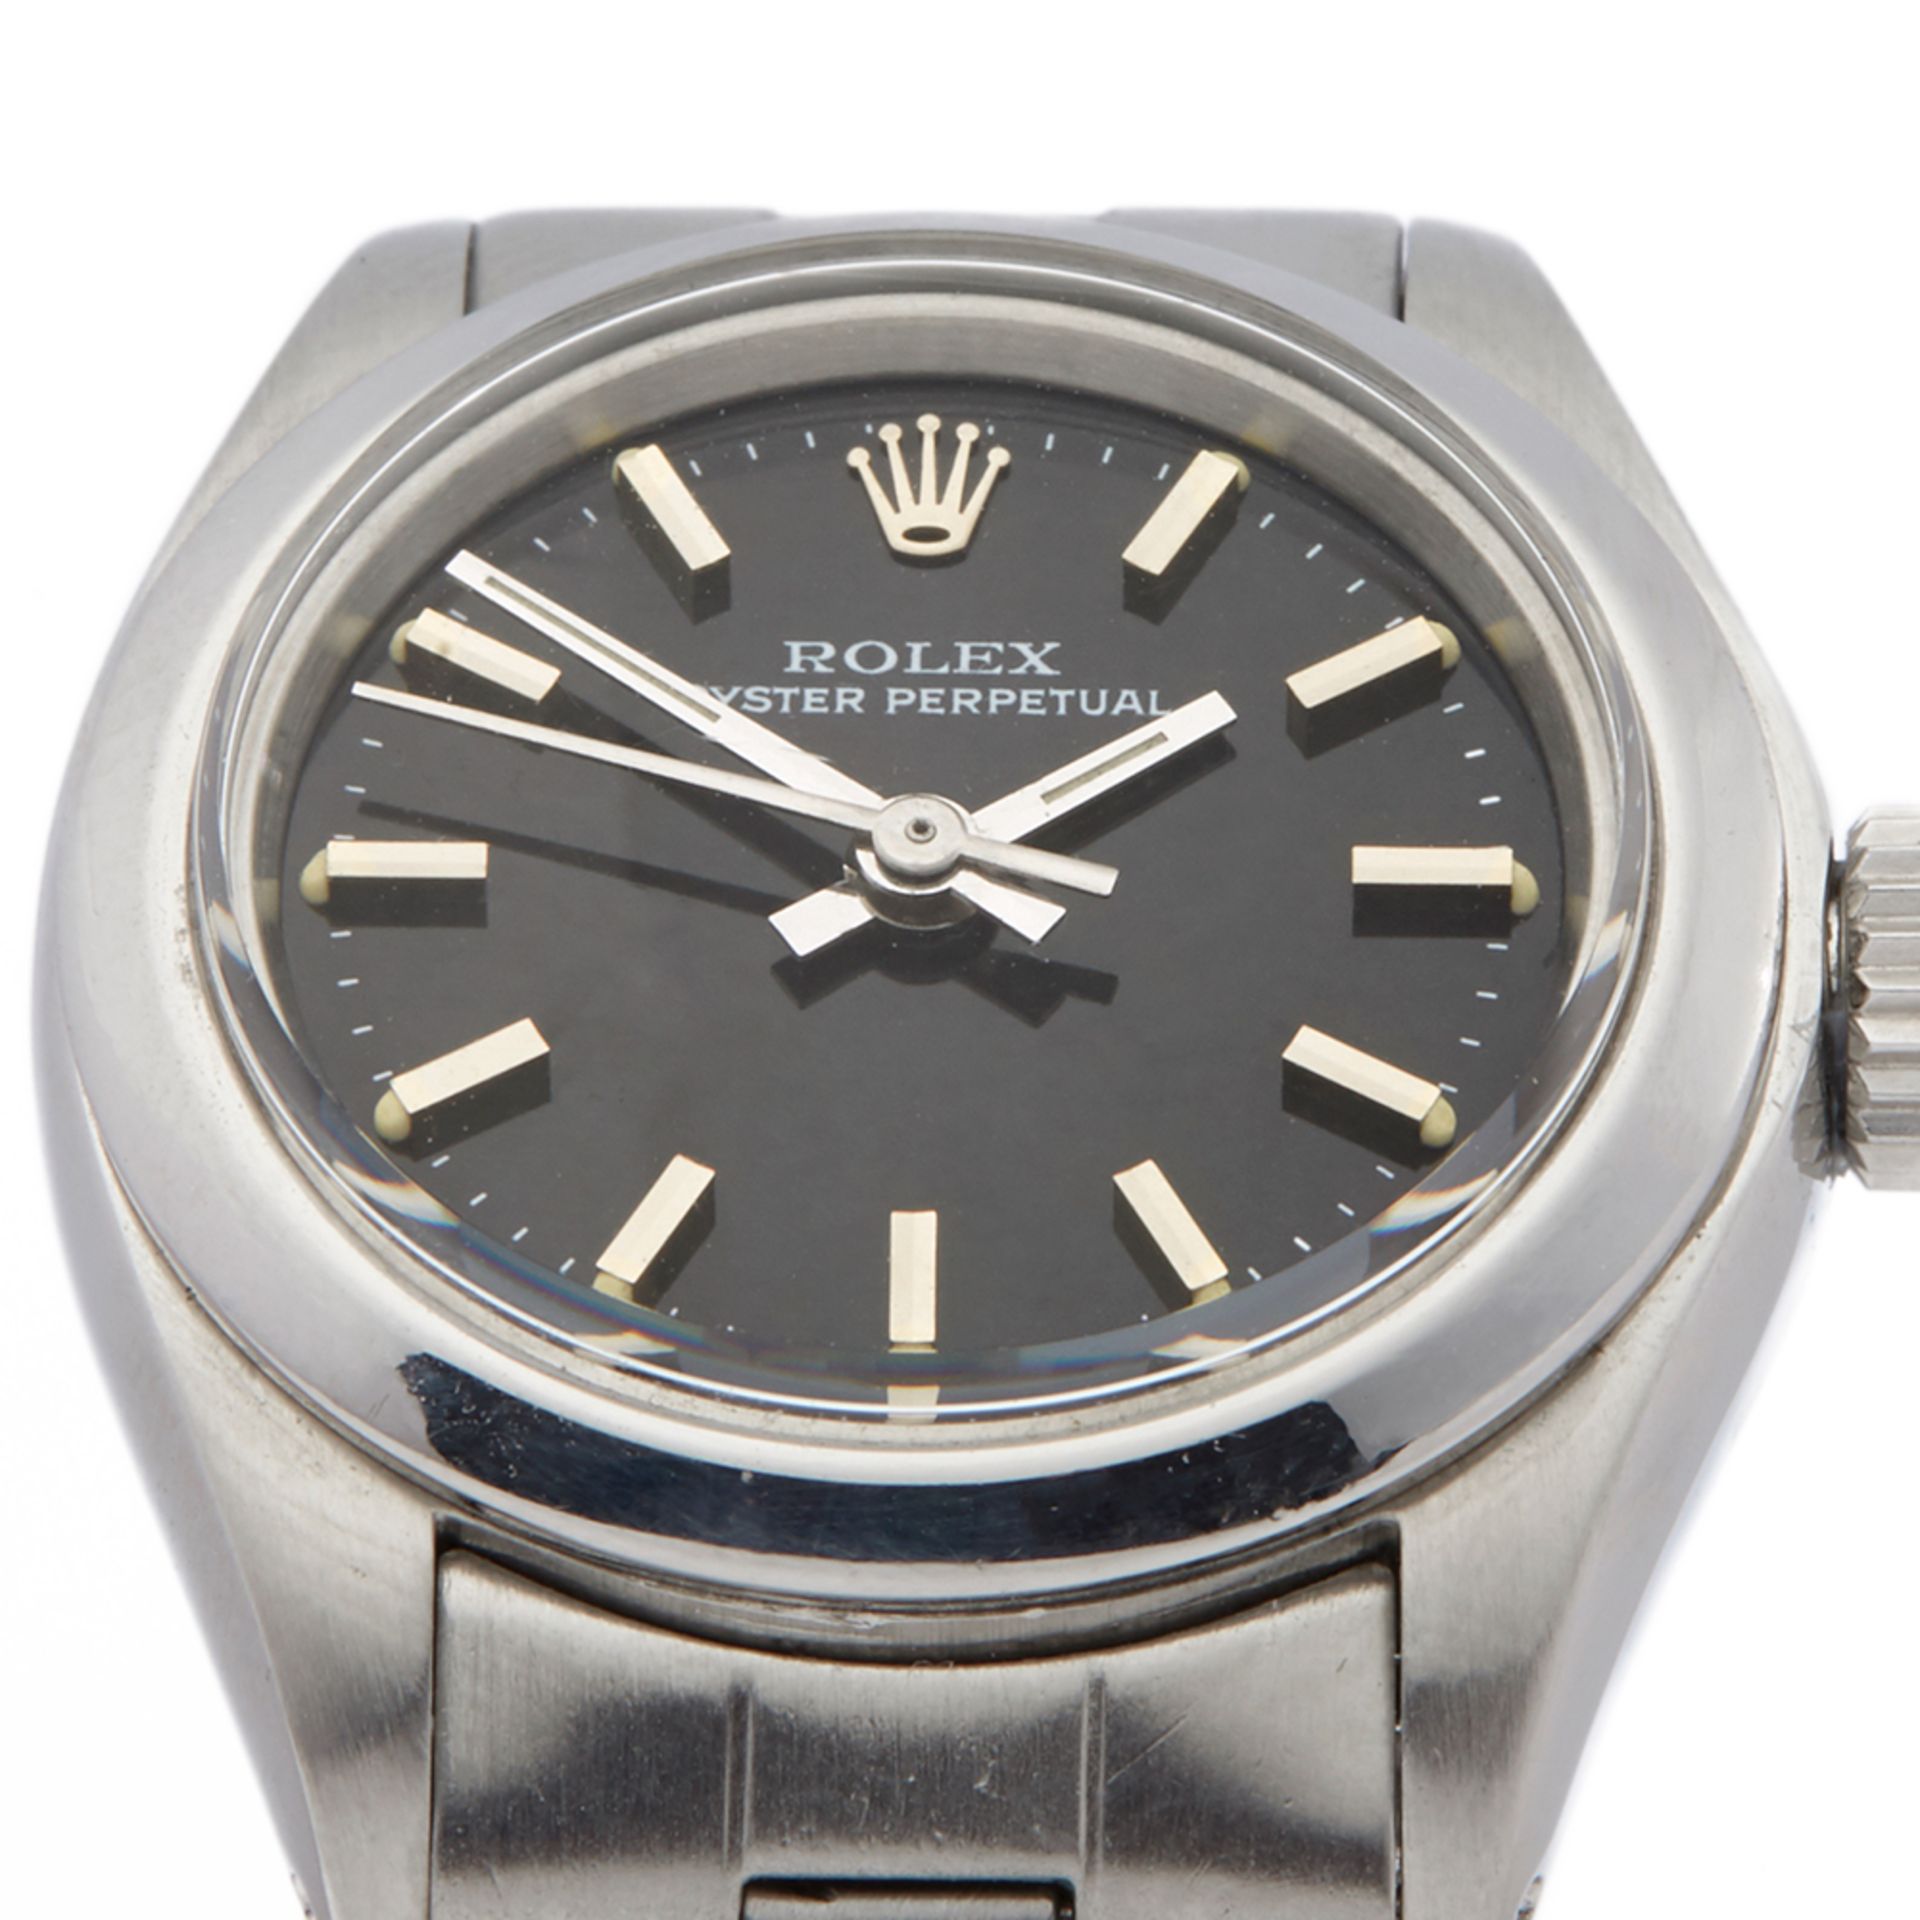 1976 Rolex Oyster Perpetual 26 Stainless Steel - 6718 - Image 9 of 10